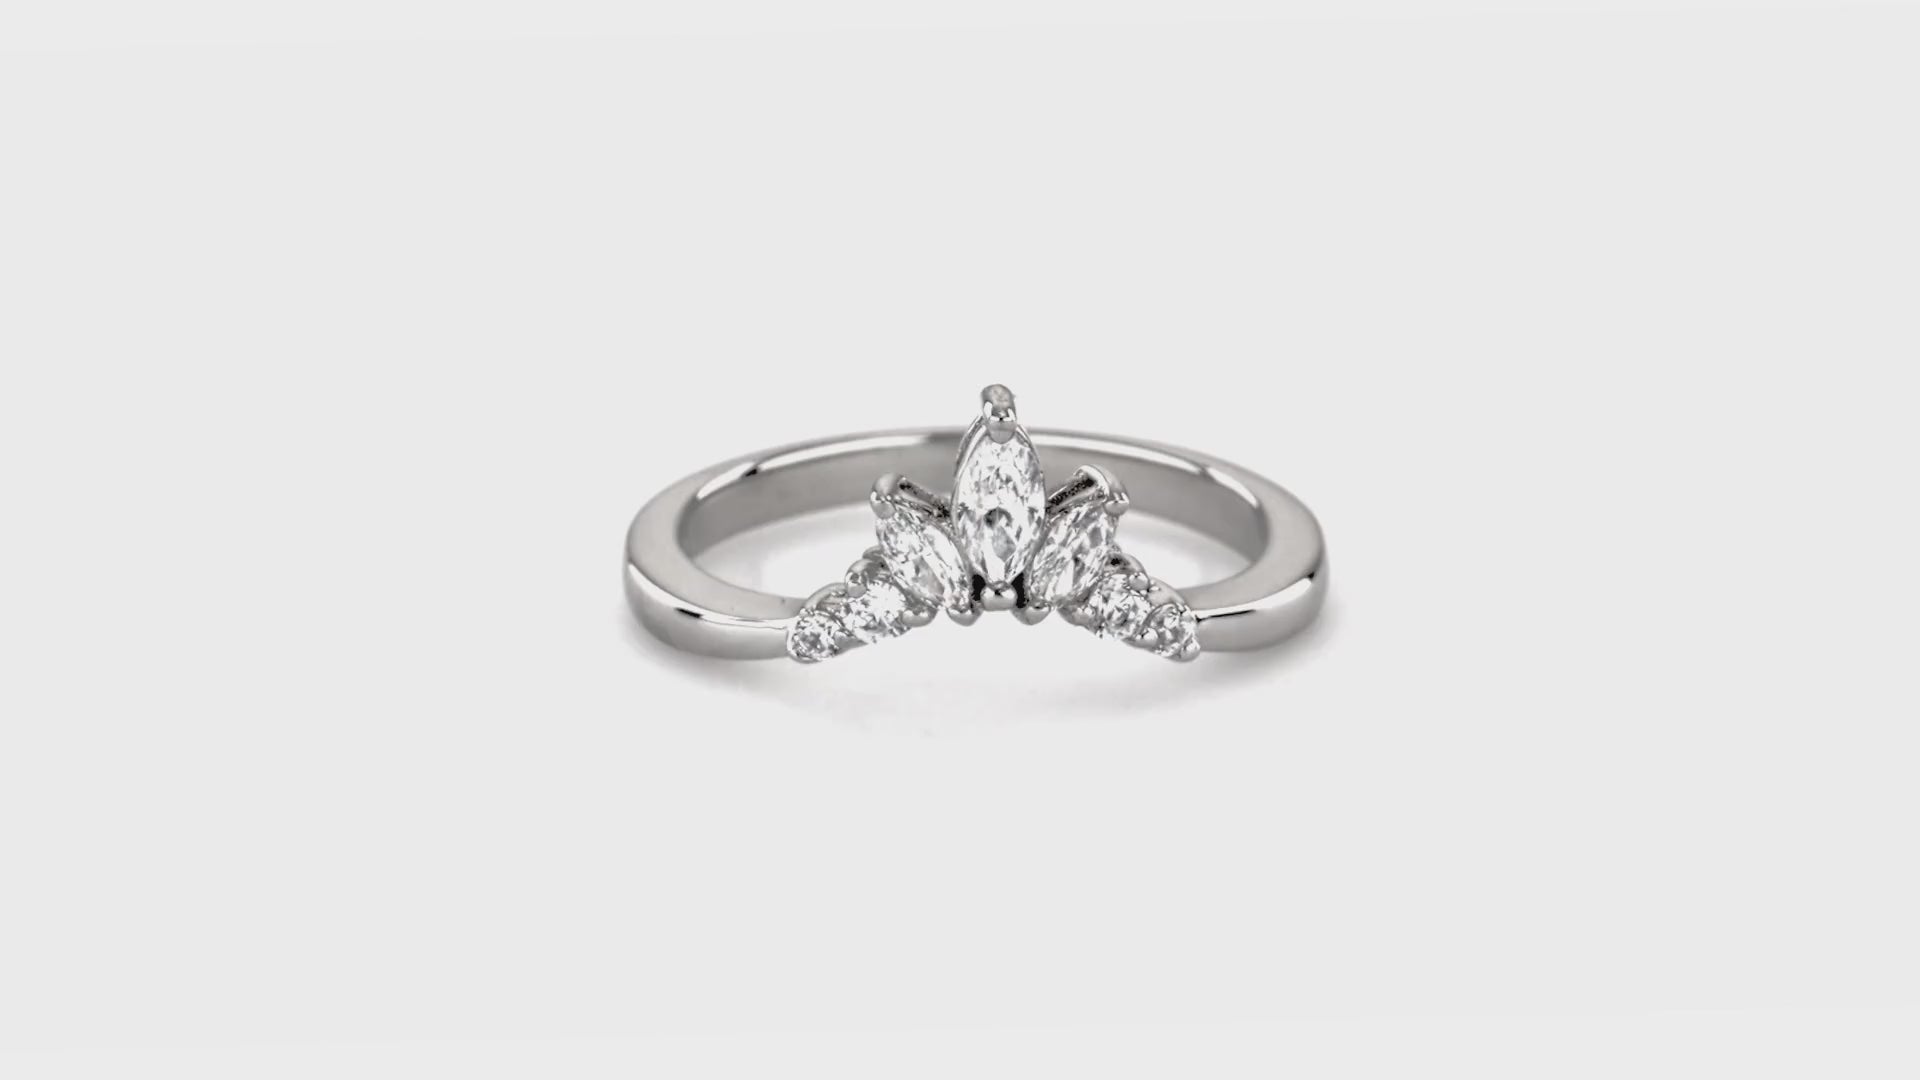 Video Contains Flower 7-Stone CZ Curved Band in Sterling Silver. Style Number R1450-B01